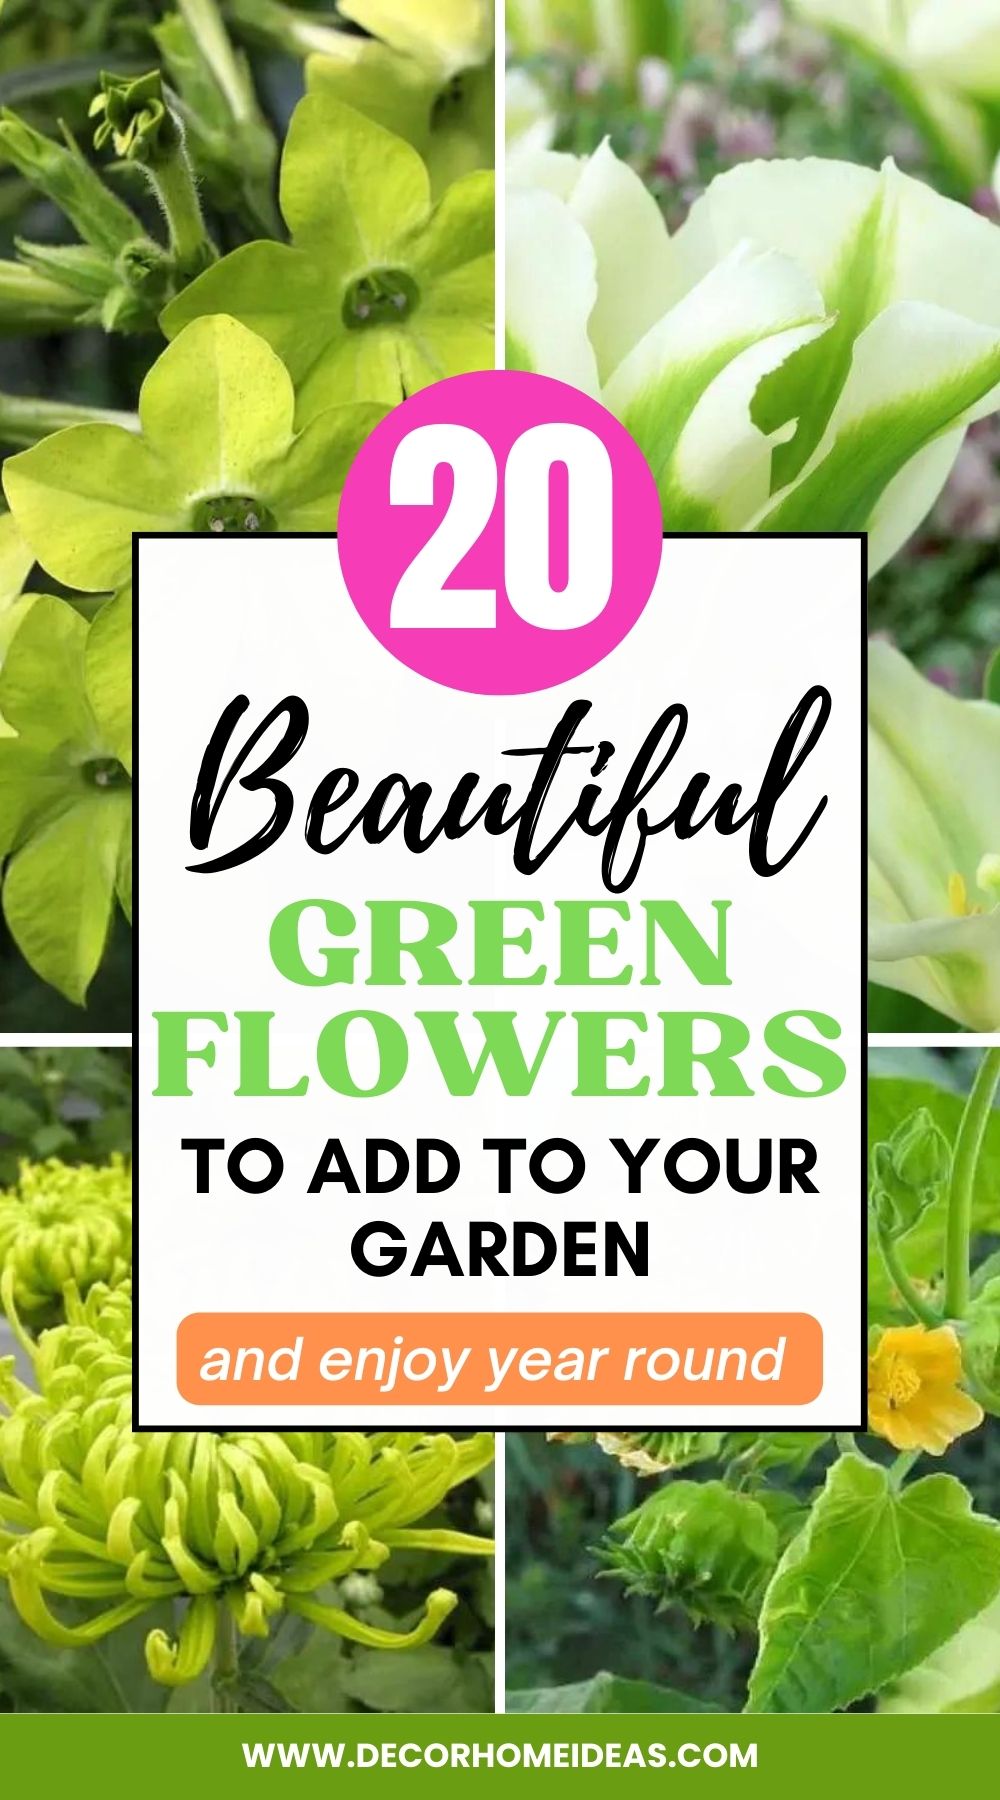 Check out our list of the 20 best and most beautiful green flowers from around the world. Find out which ones you should add to your garden!